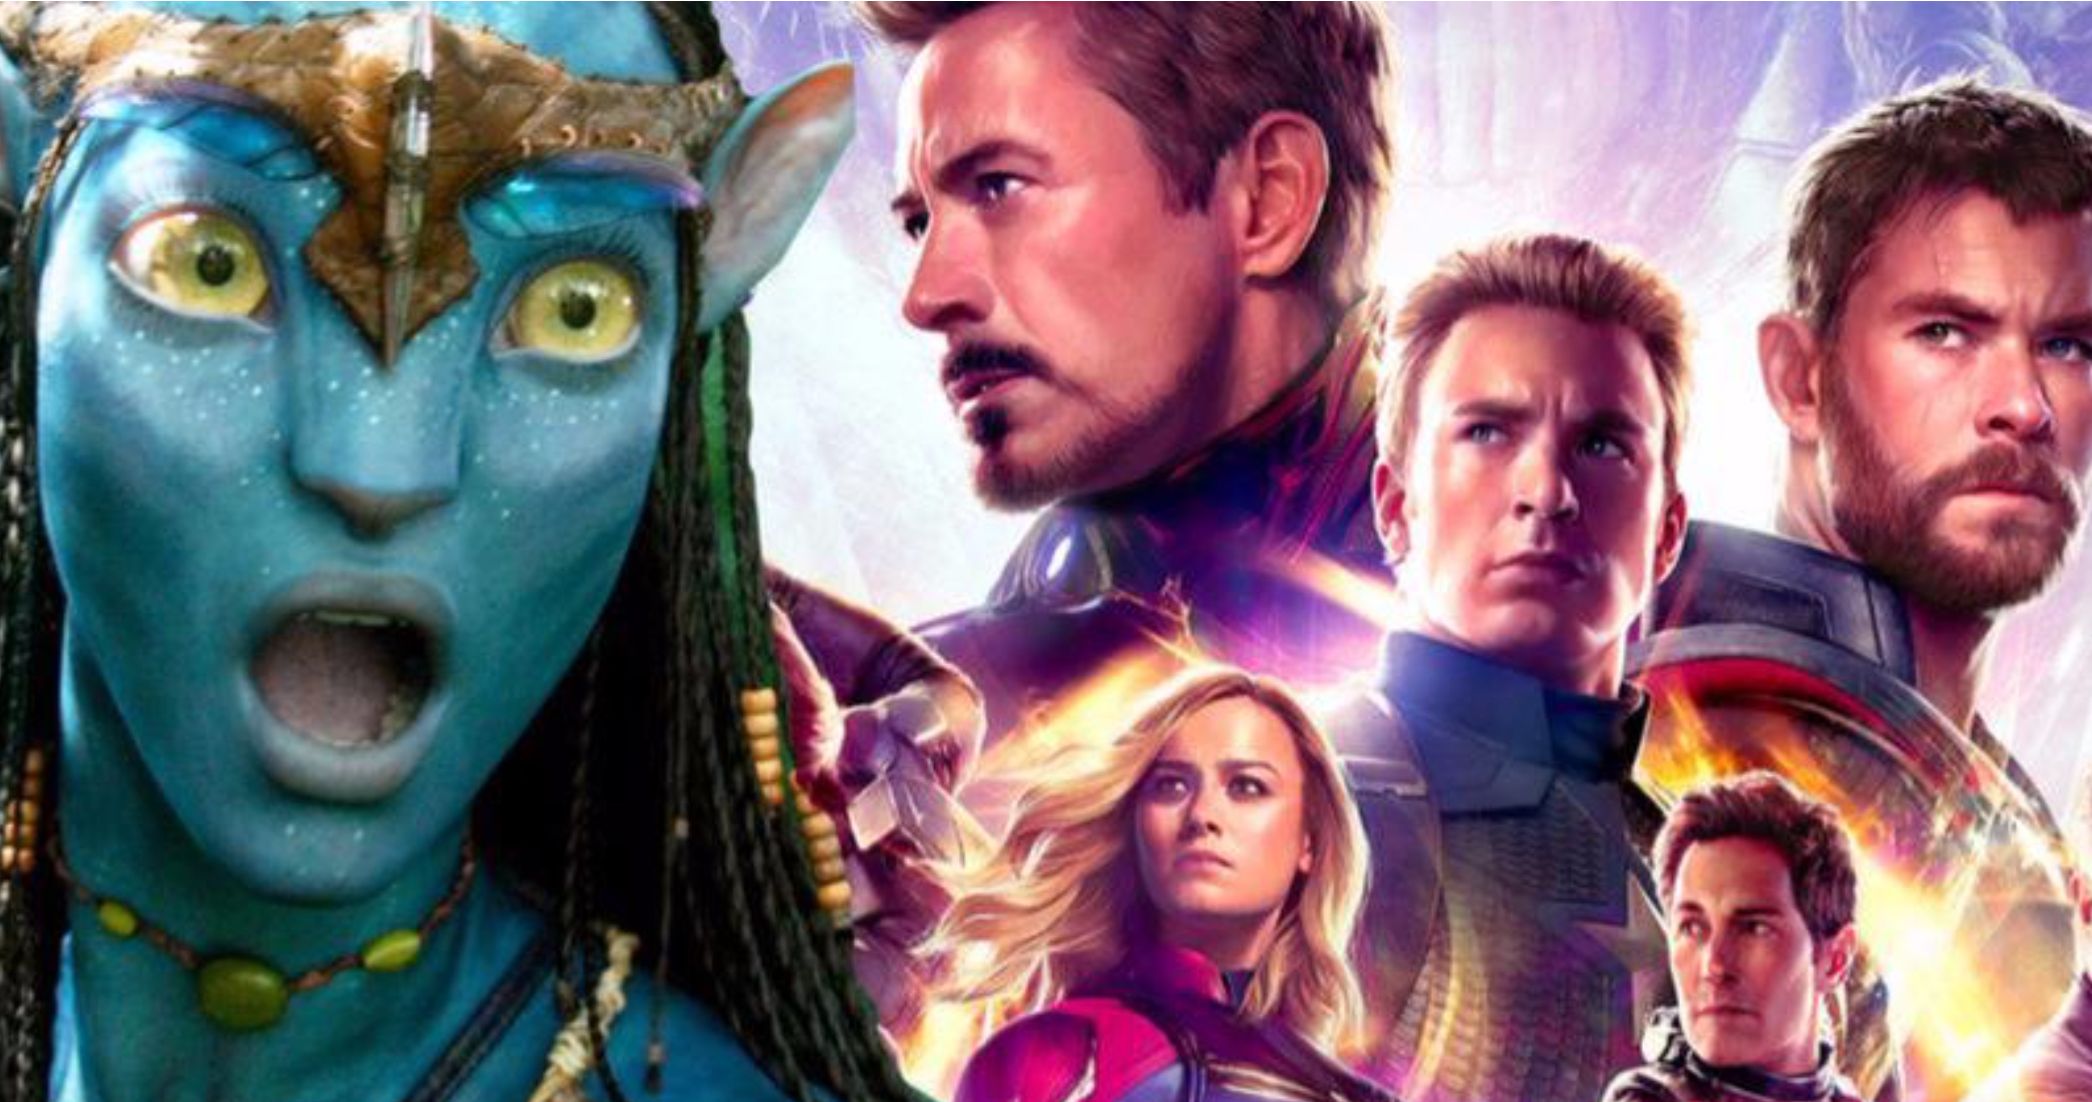 Avengers: Endgame's Box Office Record Broken By Detective Chinatown 3